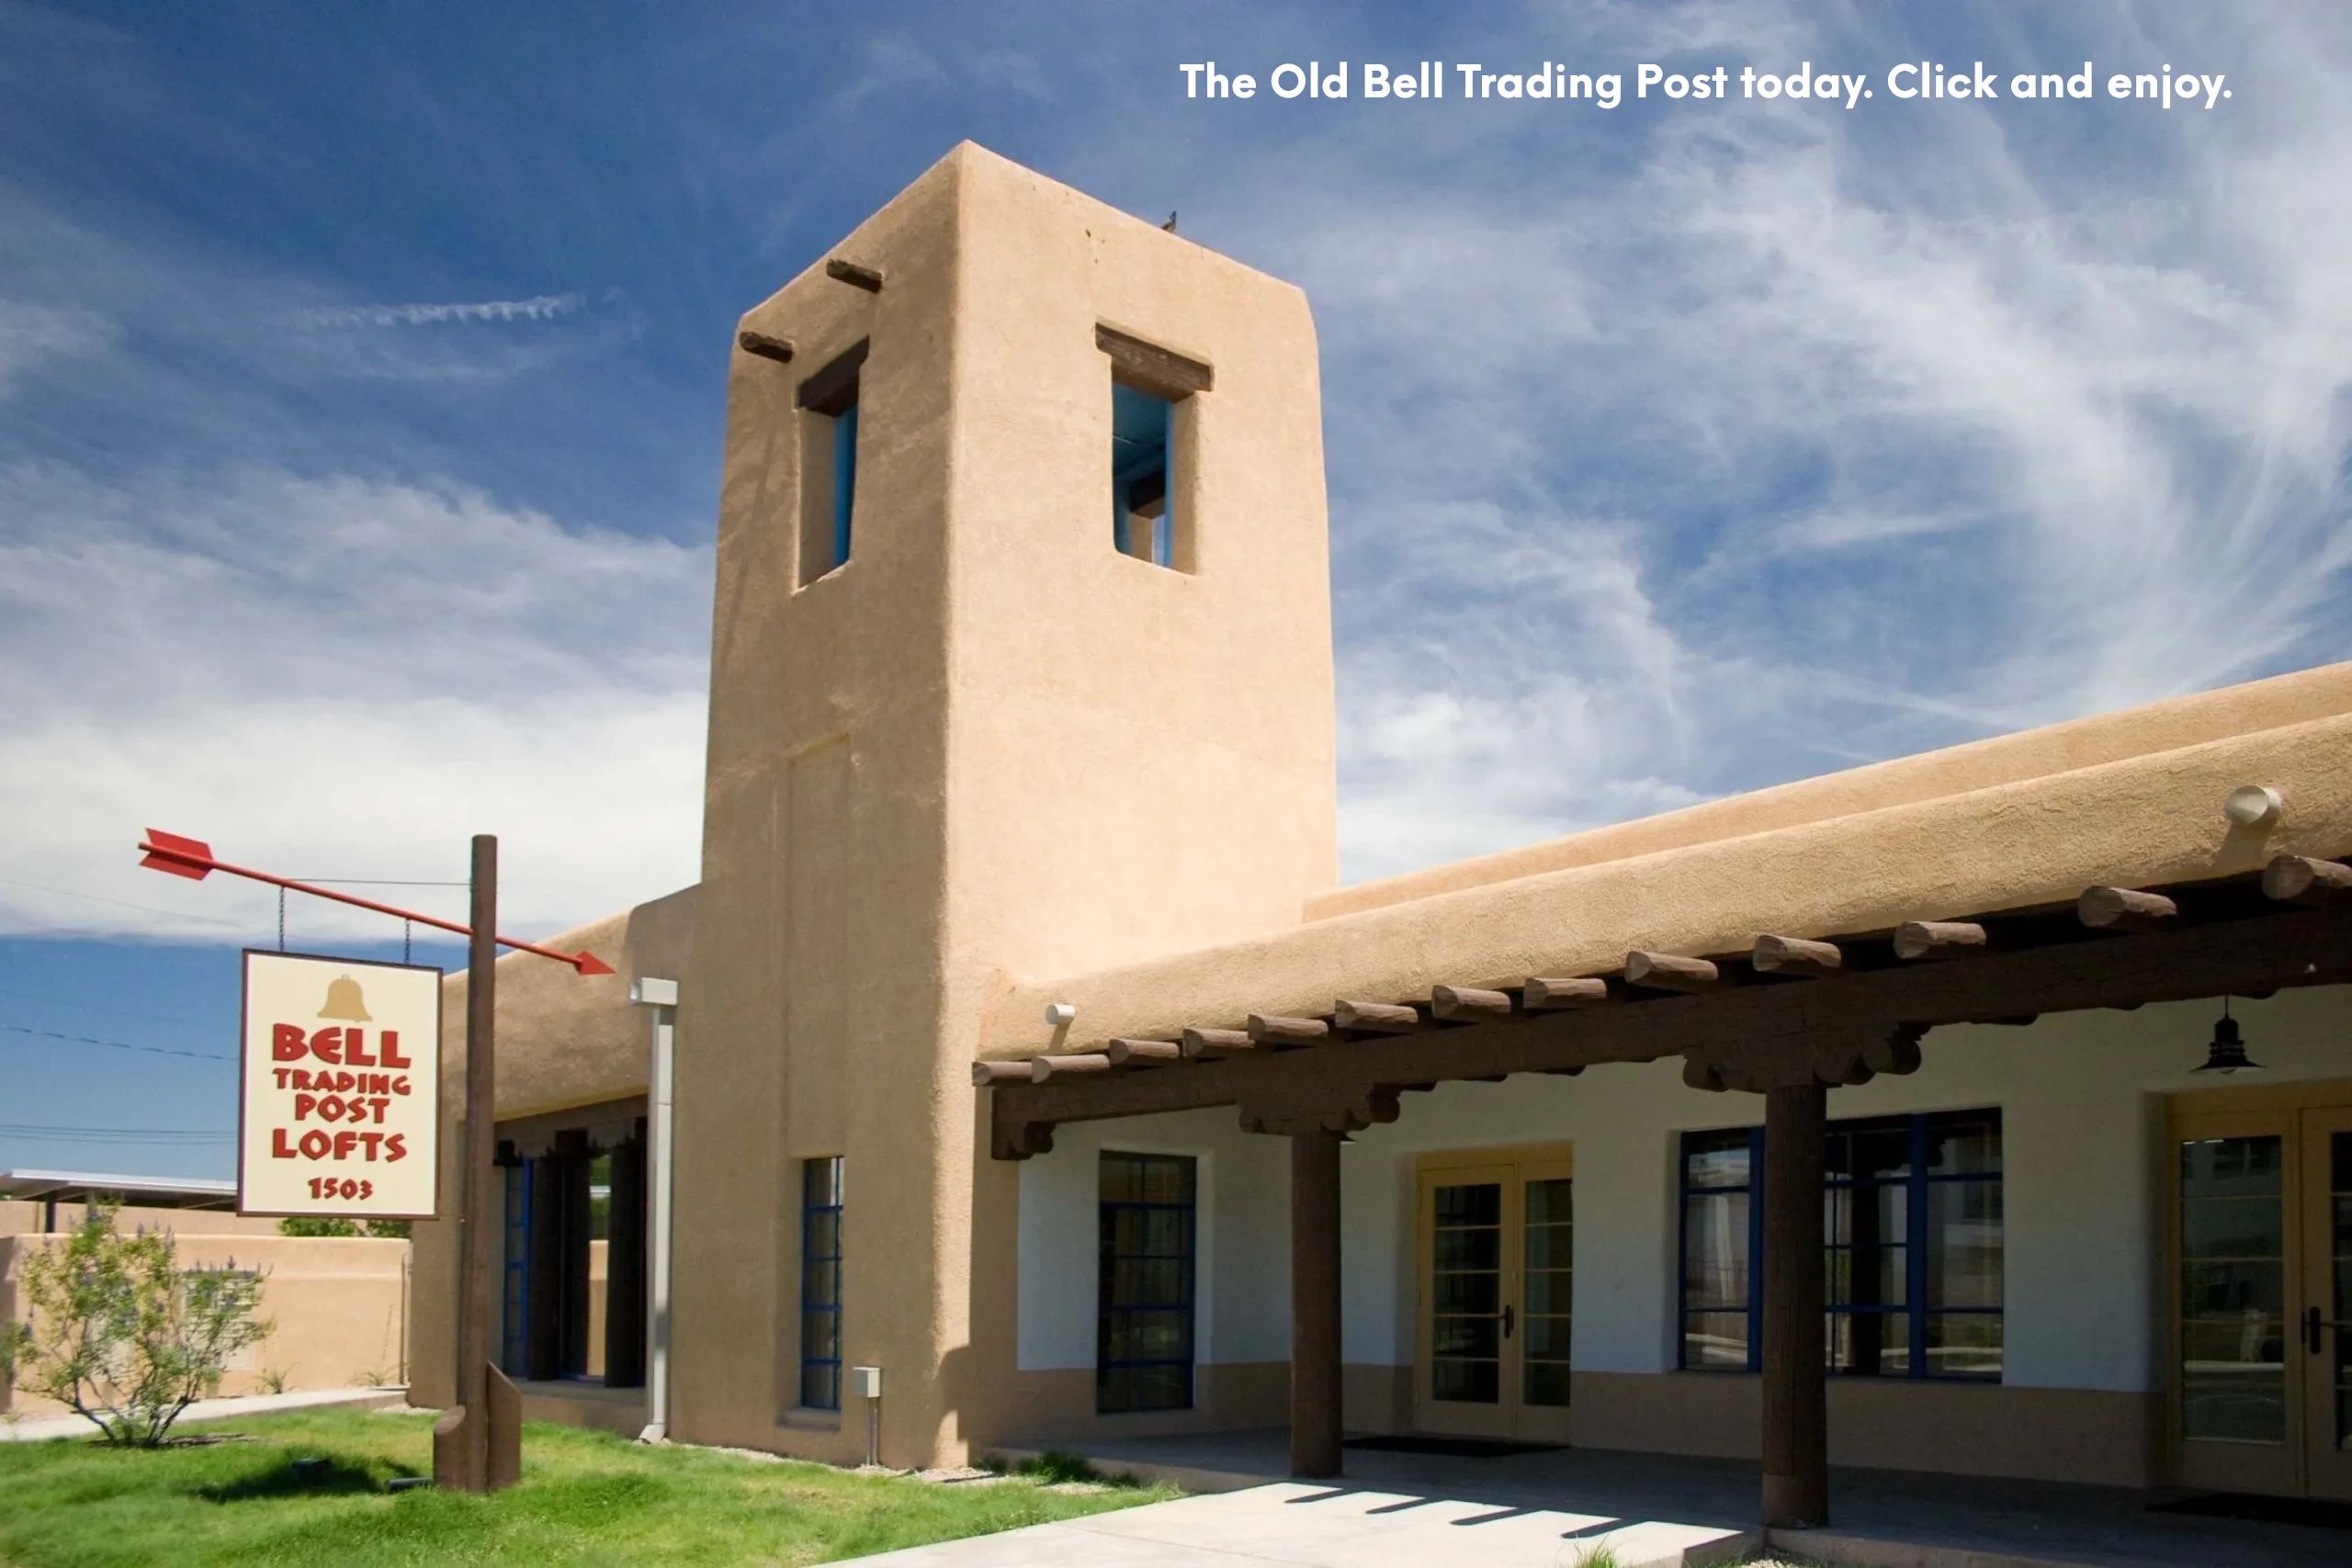 What happened to the Bell Trading Post?